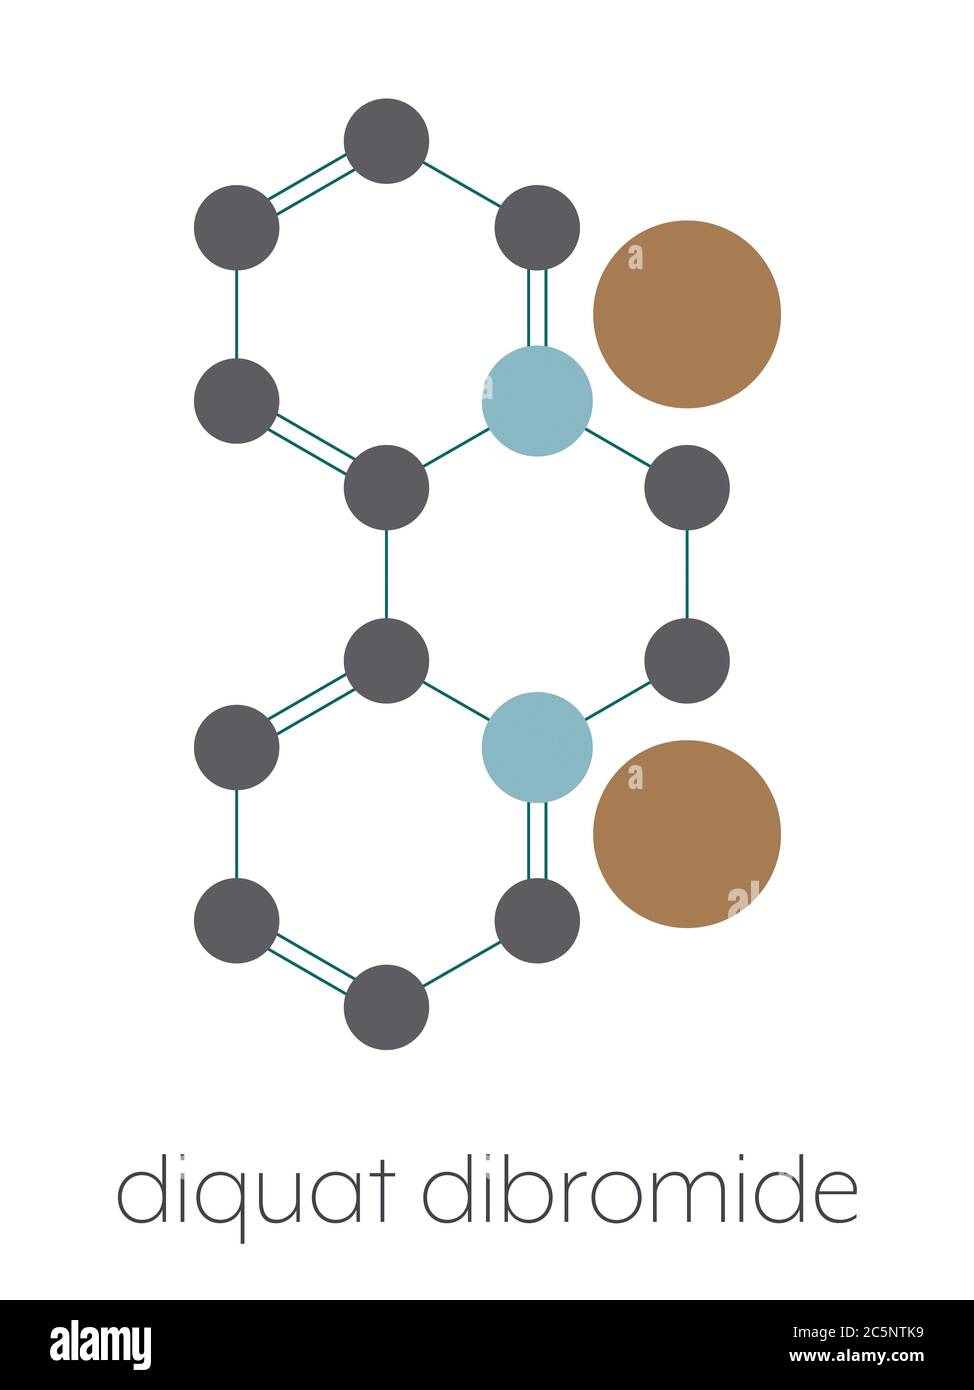 Diquat dibromide contact herbicide molecule. Stylized skeletal formula (chemical structure): Atoms are shown as color-coded circles: hydrogen (hidden), carbon (grey), nitrogen (blue), bromine (brown). Stock Photo